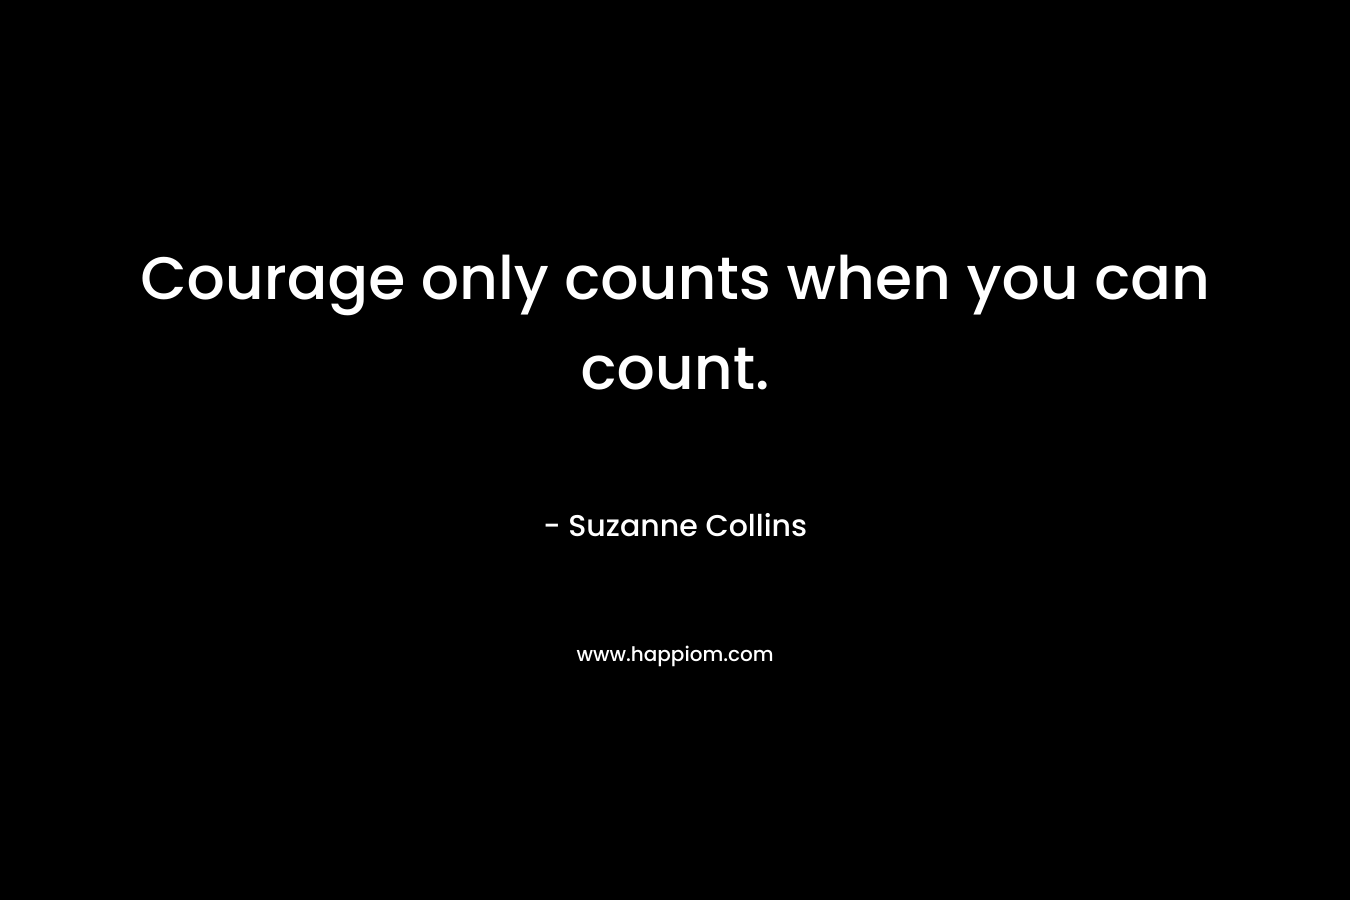 Courage only counts when you can count.